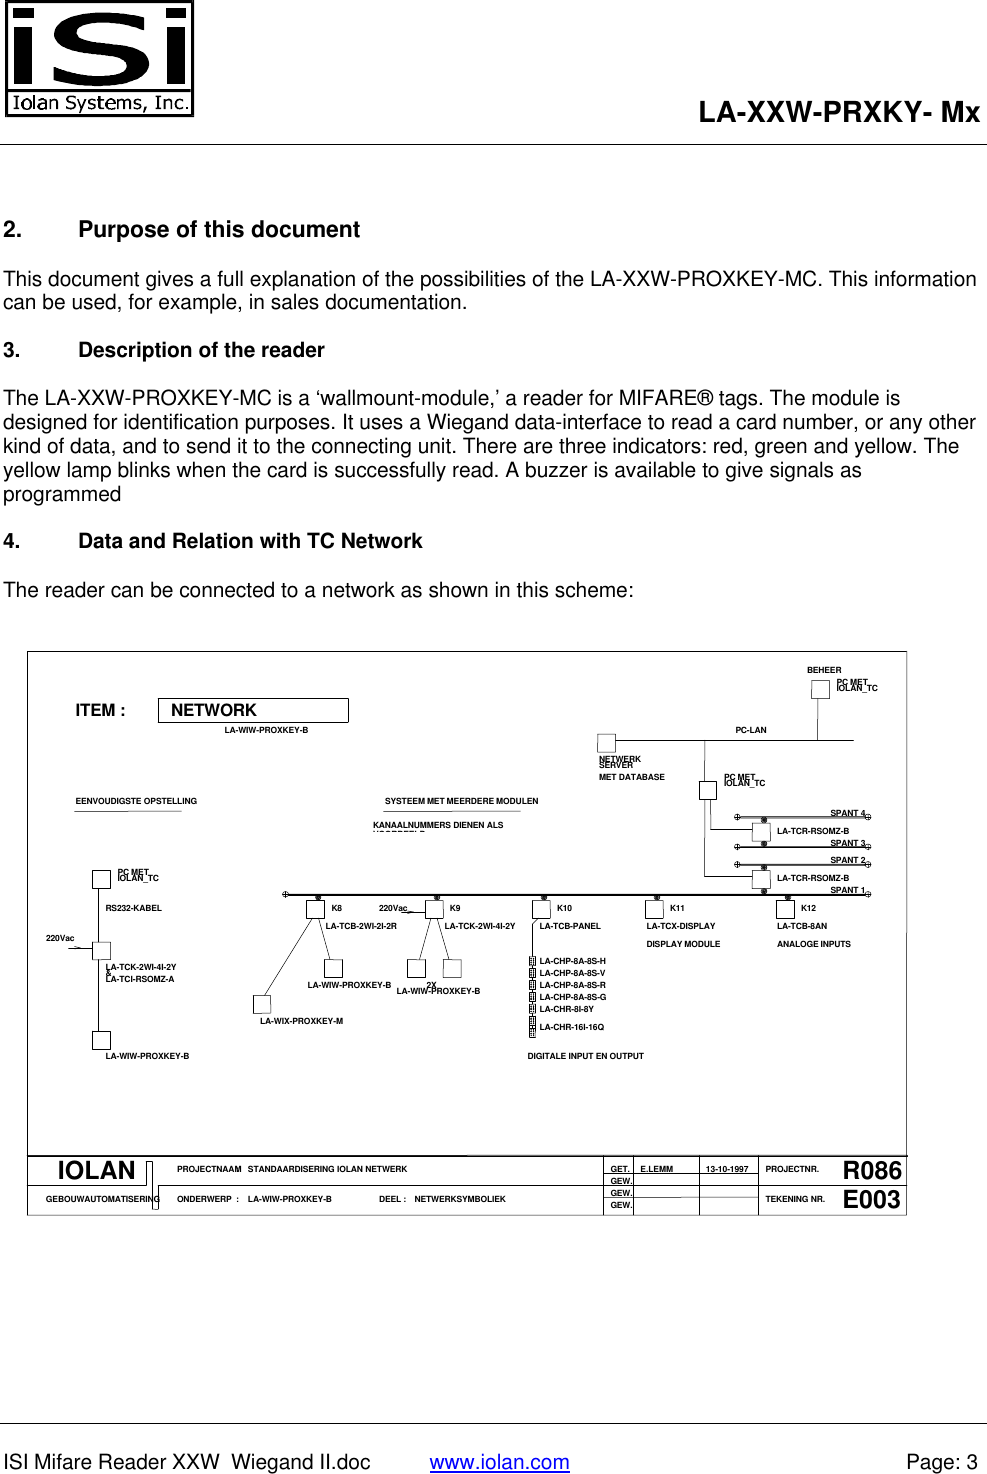 LA-XXW-PRXKY- MxISI Mifare Reader XXW  Wiegand II.doc www.iolan.com Page: 32. Purpose of this documentThis document gives a full explanation of the possibilities of the LA-XXW-PROXKEY-MC. This informationcan be used, for example, in sales documentation.3. Description of the readerThe LA-XXW-PROXKEY-MC is a ‘wallmount-module,’ a reader for MIFARE® tags. The module isdesigned for identification purposes. It uses a Wiegand data-interface to read a card number, or any otherkind of data, and to send it to the connecting unit. There are three indicators: red, green and yellow. Theyellow lamp blinks when the card is successfully read. A buzzer is available to give signals asprogrammed4. Data and Relation with TC NetworkThe reader can be connected to a network as shown in this scheme:PC METIOLAN_TCBEHEERNETWORKITEM :LA-WIW-PROXKEY-BSERVERNETWERKMET DATABASE PC METIOLAN_TCPC-LANSPANT 3SPANT 4LA-TCR-RSOMZ-BSYSTEEM MET MEERDERE MODULENKANAALNUMMERS DIENEN ALSVOORBEELDEENVOUDIGSTE OPSTELLINGRS232-KABELPC METIOLAN_TCLA-TCB-2WI-2I-2RK8LA-TCK-2WI-4I-2YK9220VacLA-TCB-PANELK10LA-TCX-DISPLAYK11LA-TCR-RSOMZ-BLA-TCB-8ANSPANT 1SPANT 2K12ANALOGE INPUTSDISPLAY MODULELA-CHP-8A-8S-HLA-CHP-8A-8S-VLA-CHP-8A-8S-R2XLA-WIW-PROXKEY-BLA-WIW-PROXKEY-BLA-TCK-2WI-4I-2Y&amp;LA-TCI-RSOMZ-A220VacLA-WIW-PROXKEY-BLA-WIX-PROXKEY-MLA-CHR-8I-8YLA-CHR-16I-16QLA-CHP-8A-8S-GDIGITALE INPUT EN OUTPUTIOLANGEBOUWAUTOMATISERINGPROJECTNAAMONDERWERP::STANDAARDISERING IOLAN NETWERKLA-WIW-PROXKEY-B DEEL : NETWERKSYMBOLIEKGET.GEW.GEW.GEW.E.LEMM PROJECTNR.TEKENING NR.13-10-1997 R086E003